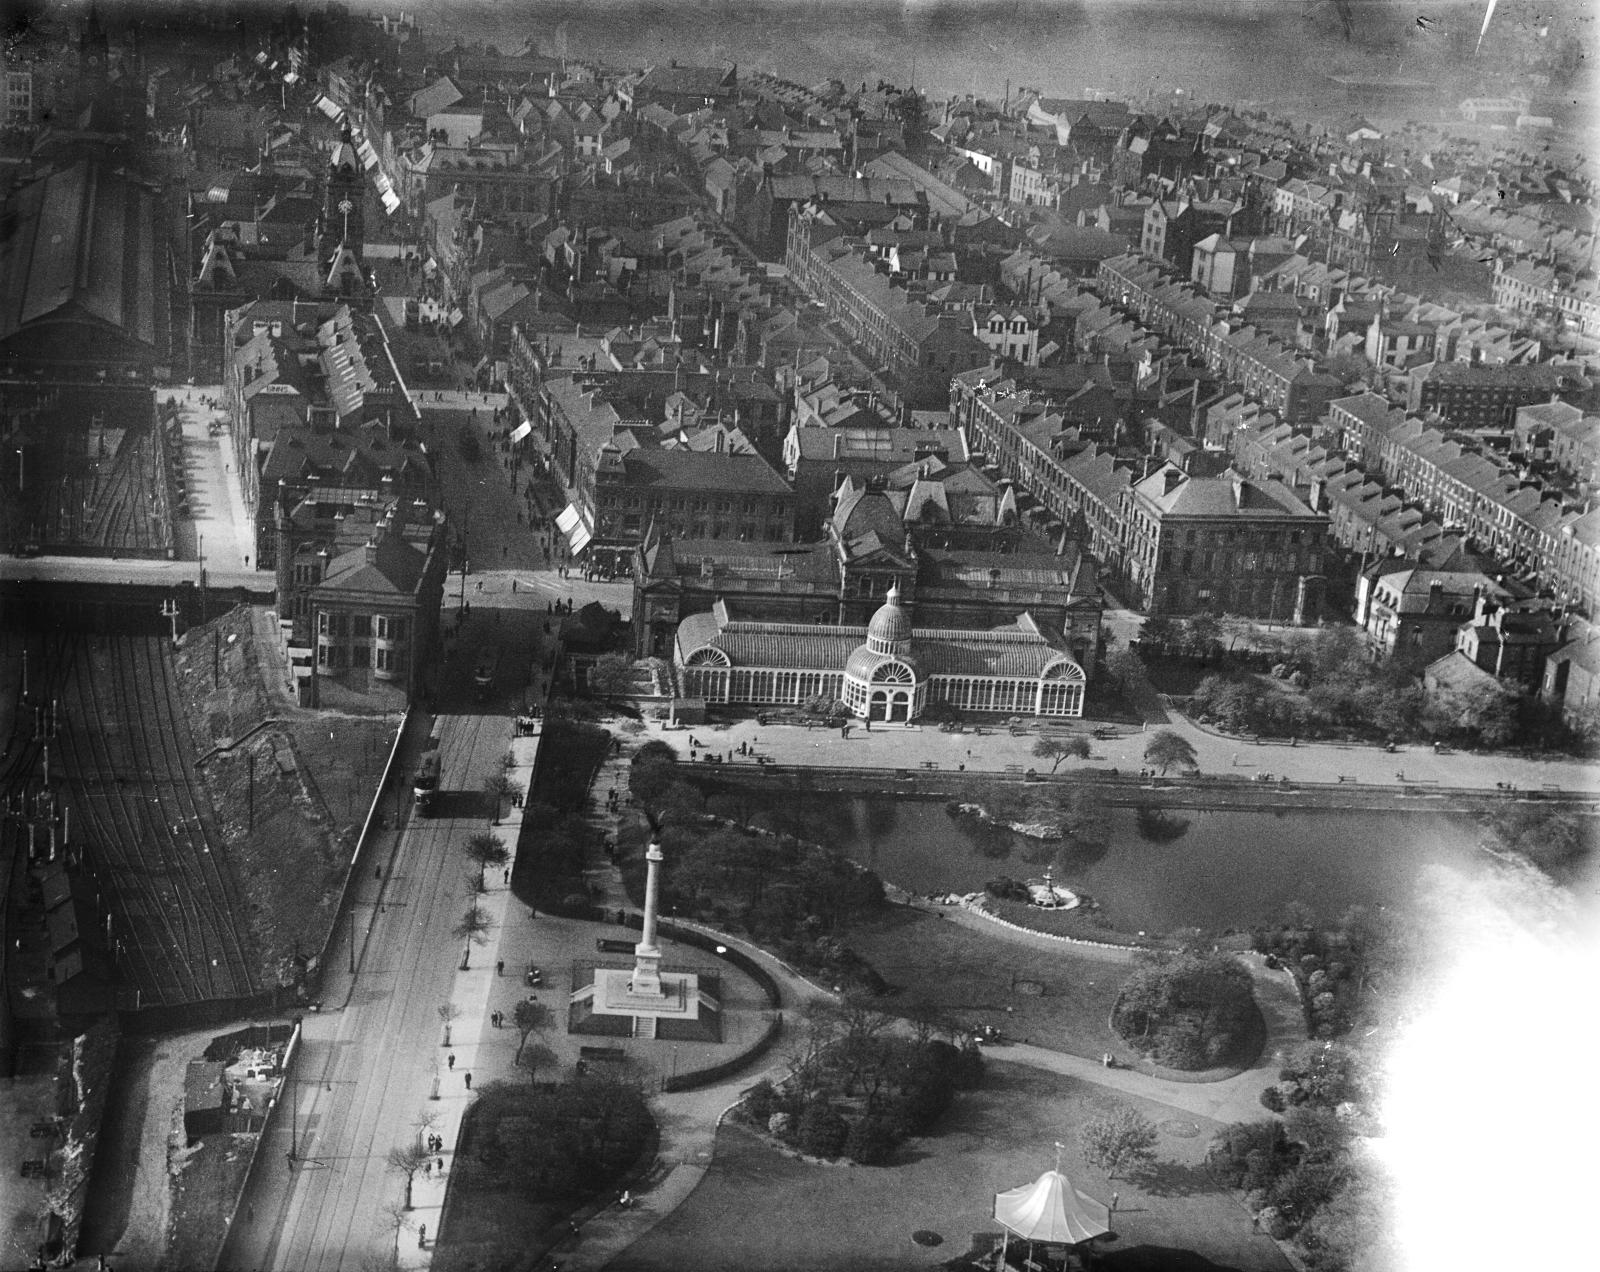 Old black and white photo showing an aerial view of the Winter Gardens.